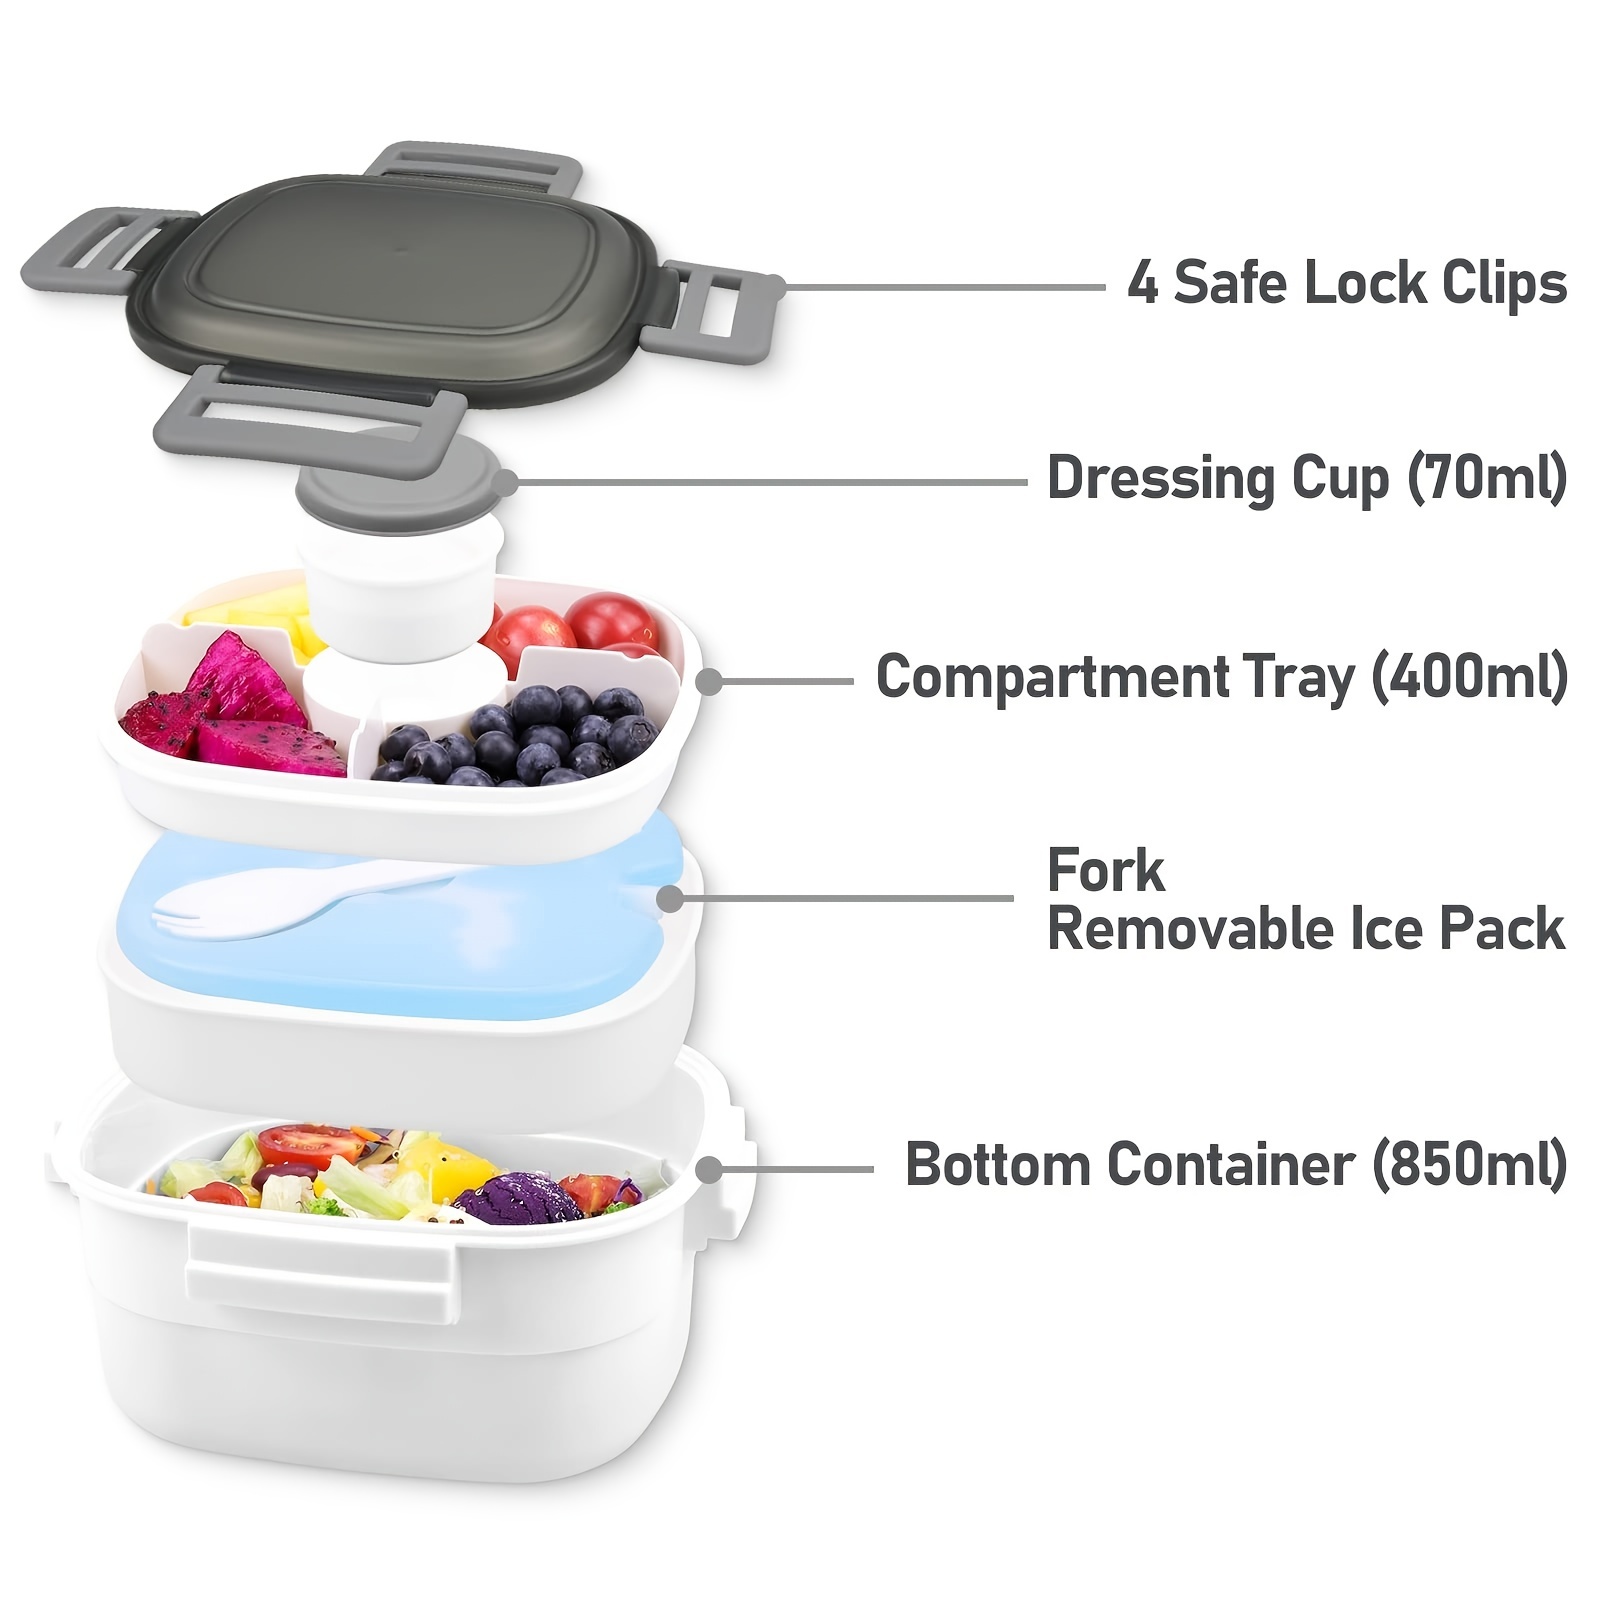 Premium Bento Box - Lunch Box is Leakproof, Multi Removable Compartments.  Dishwasher and Microwave Safe Food Container with Built-in Removable Ice